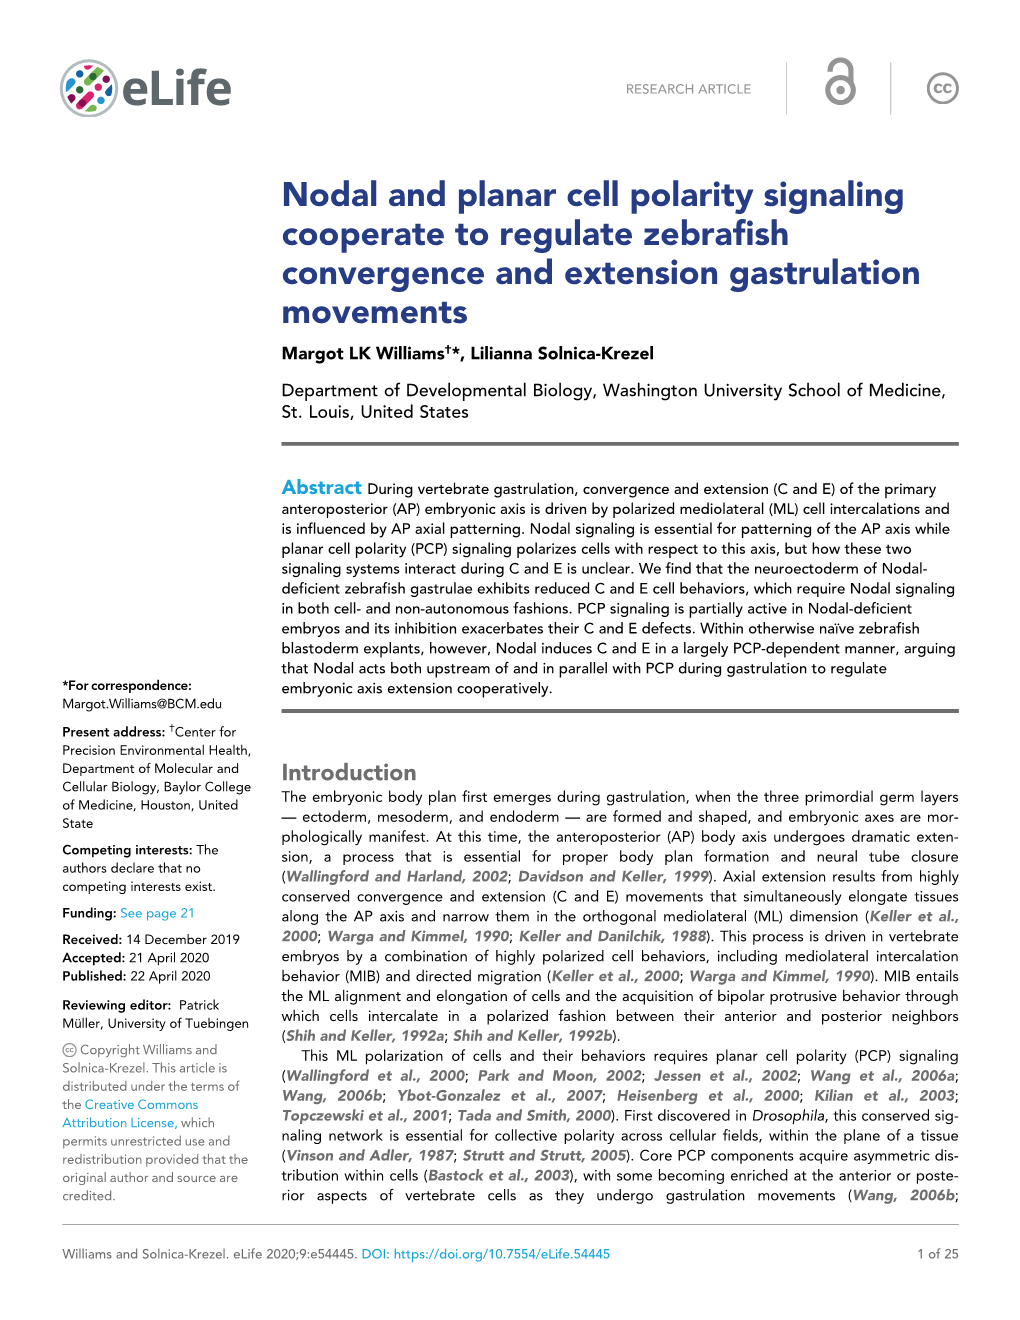 Nodal and Planar Cell Polarity Signaling Cooperate to Regulate